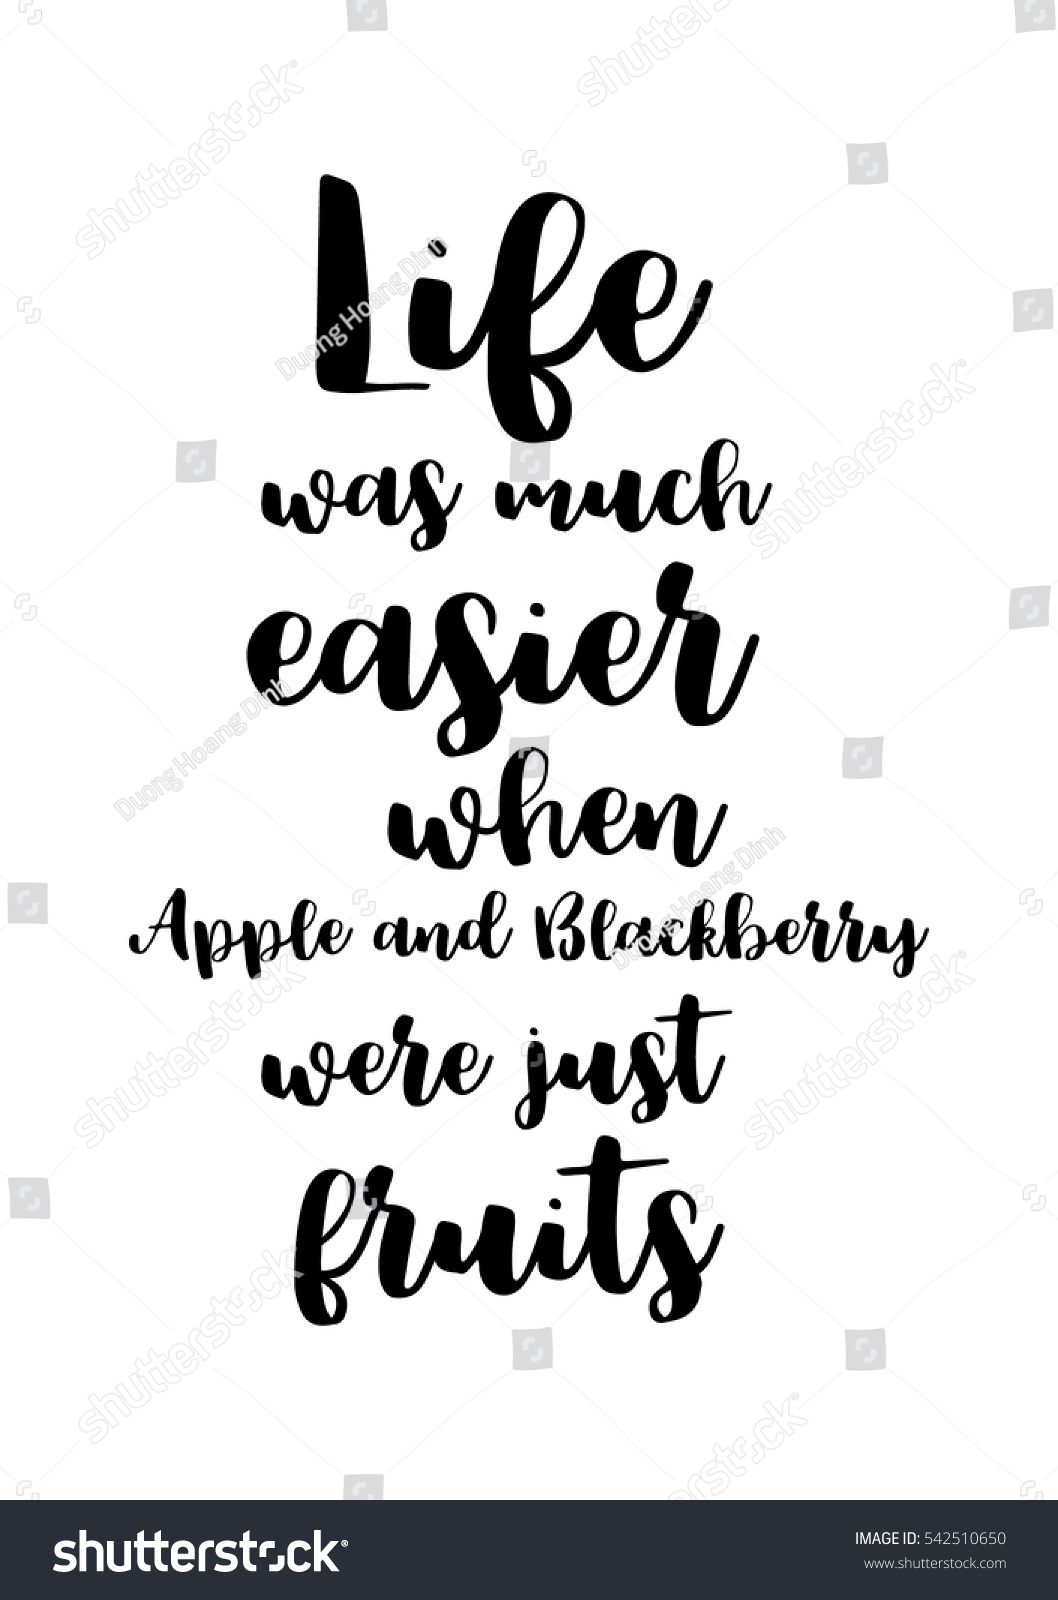 Quote Food calligraphy style Hand lettering design element Inspirational quote Life was much